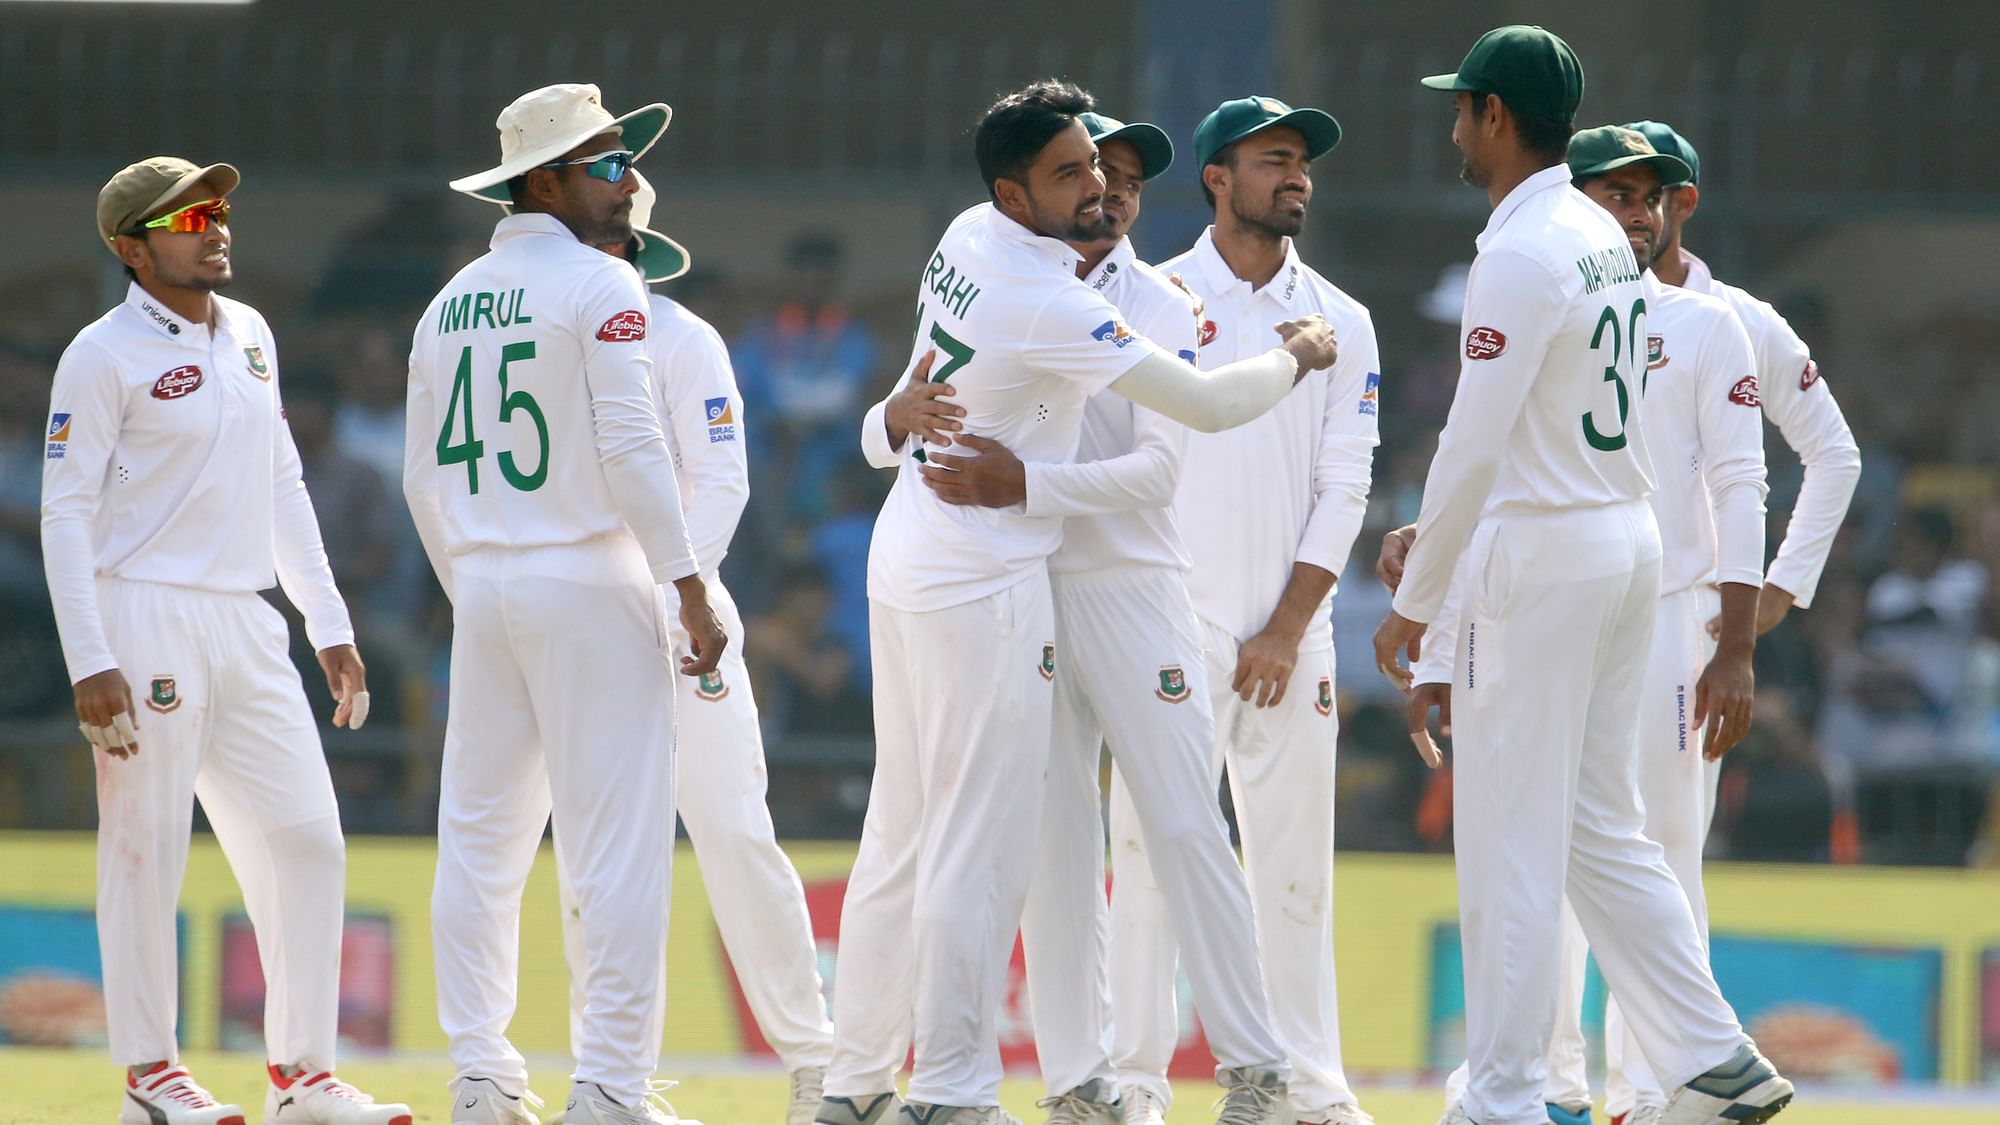 Refusing to budge from its stand, the Bangladesh Cricket Board has said it was ready to play only T20 Internationals in Pakistan, preferring a neutral venue for the planned Test series.